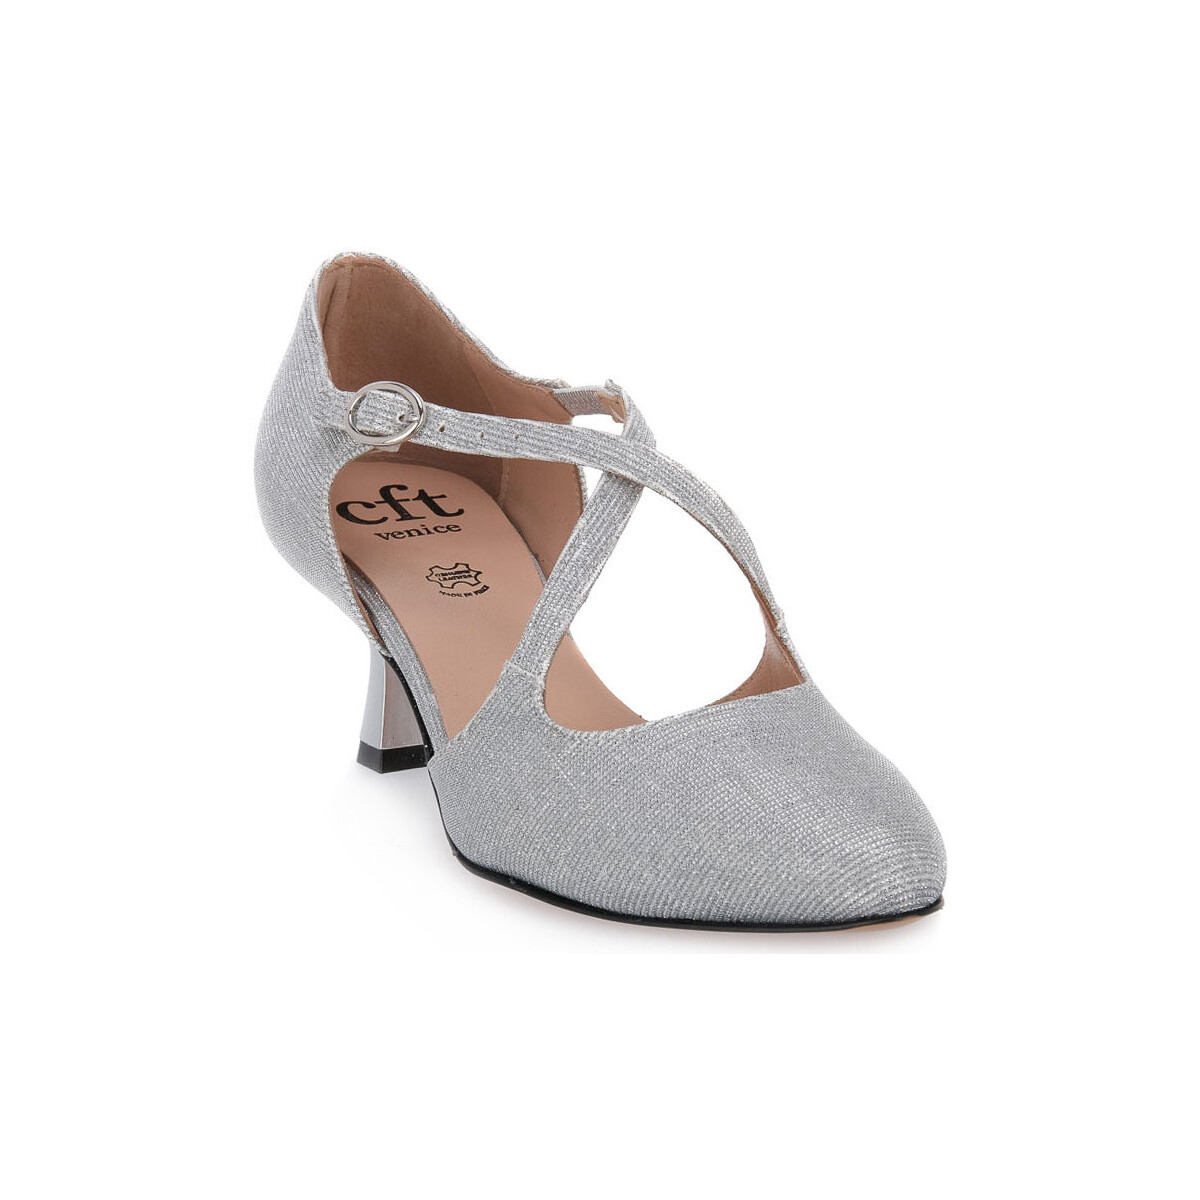 Zapatos Mujer Multideporte Confort GALASSIA argento Gris